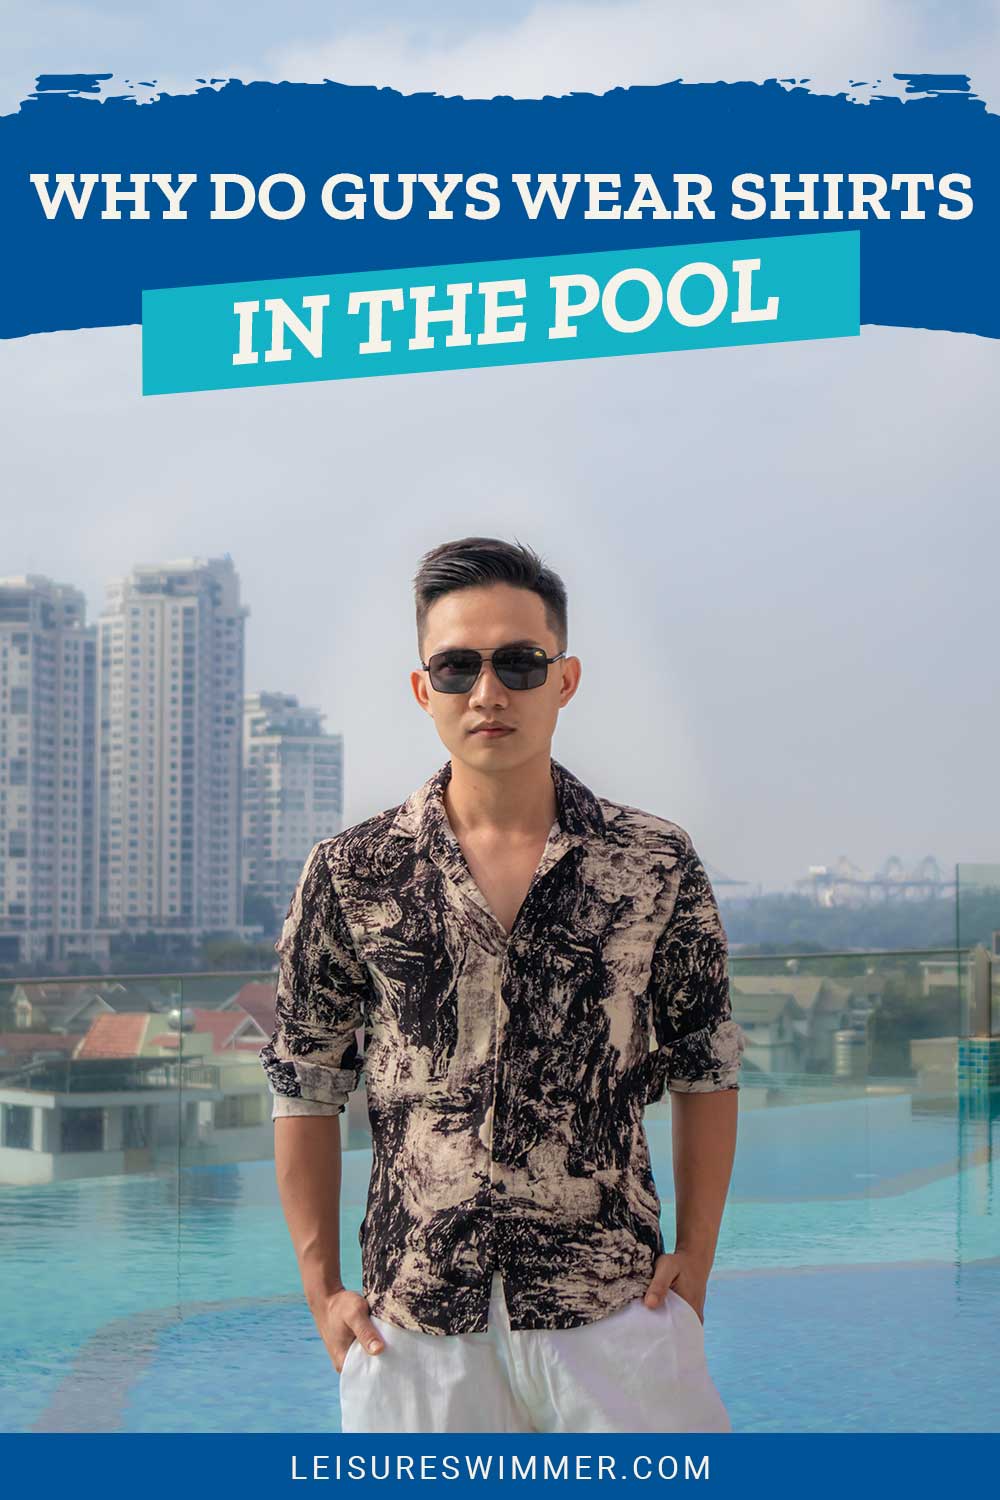 Why Do Guys Wear Shirts In The Pool - Leisure Swimmer